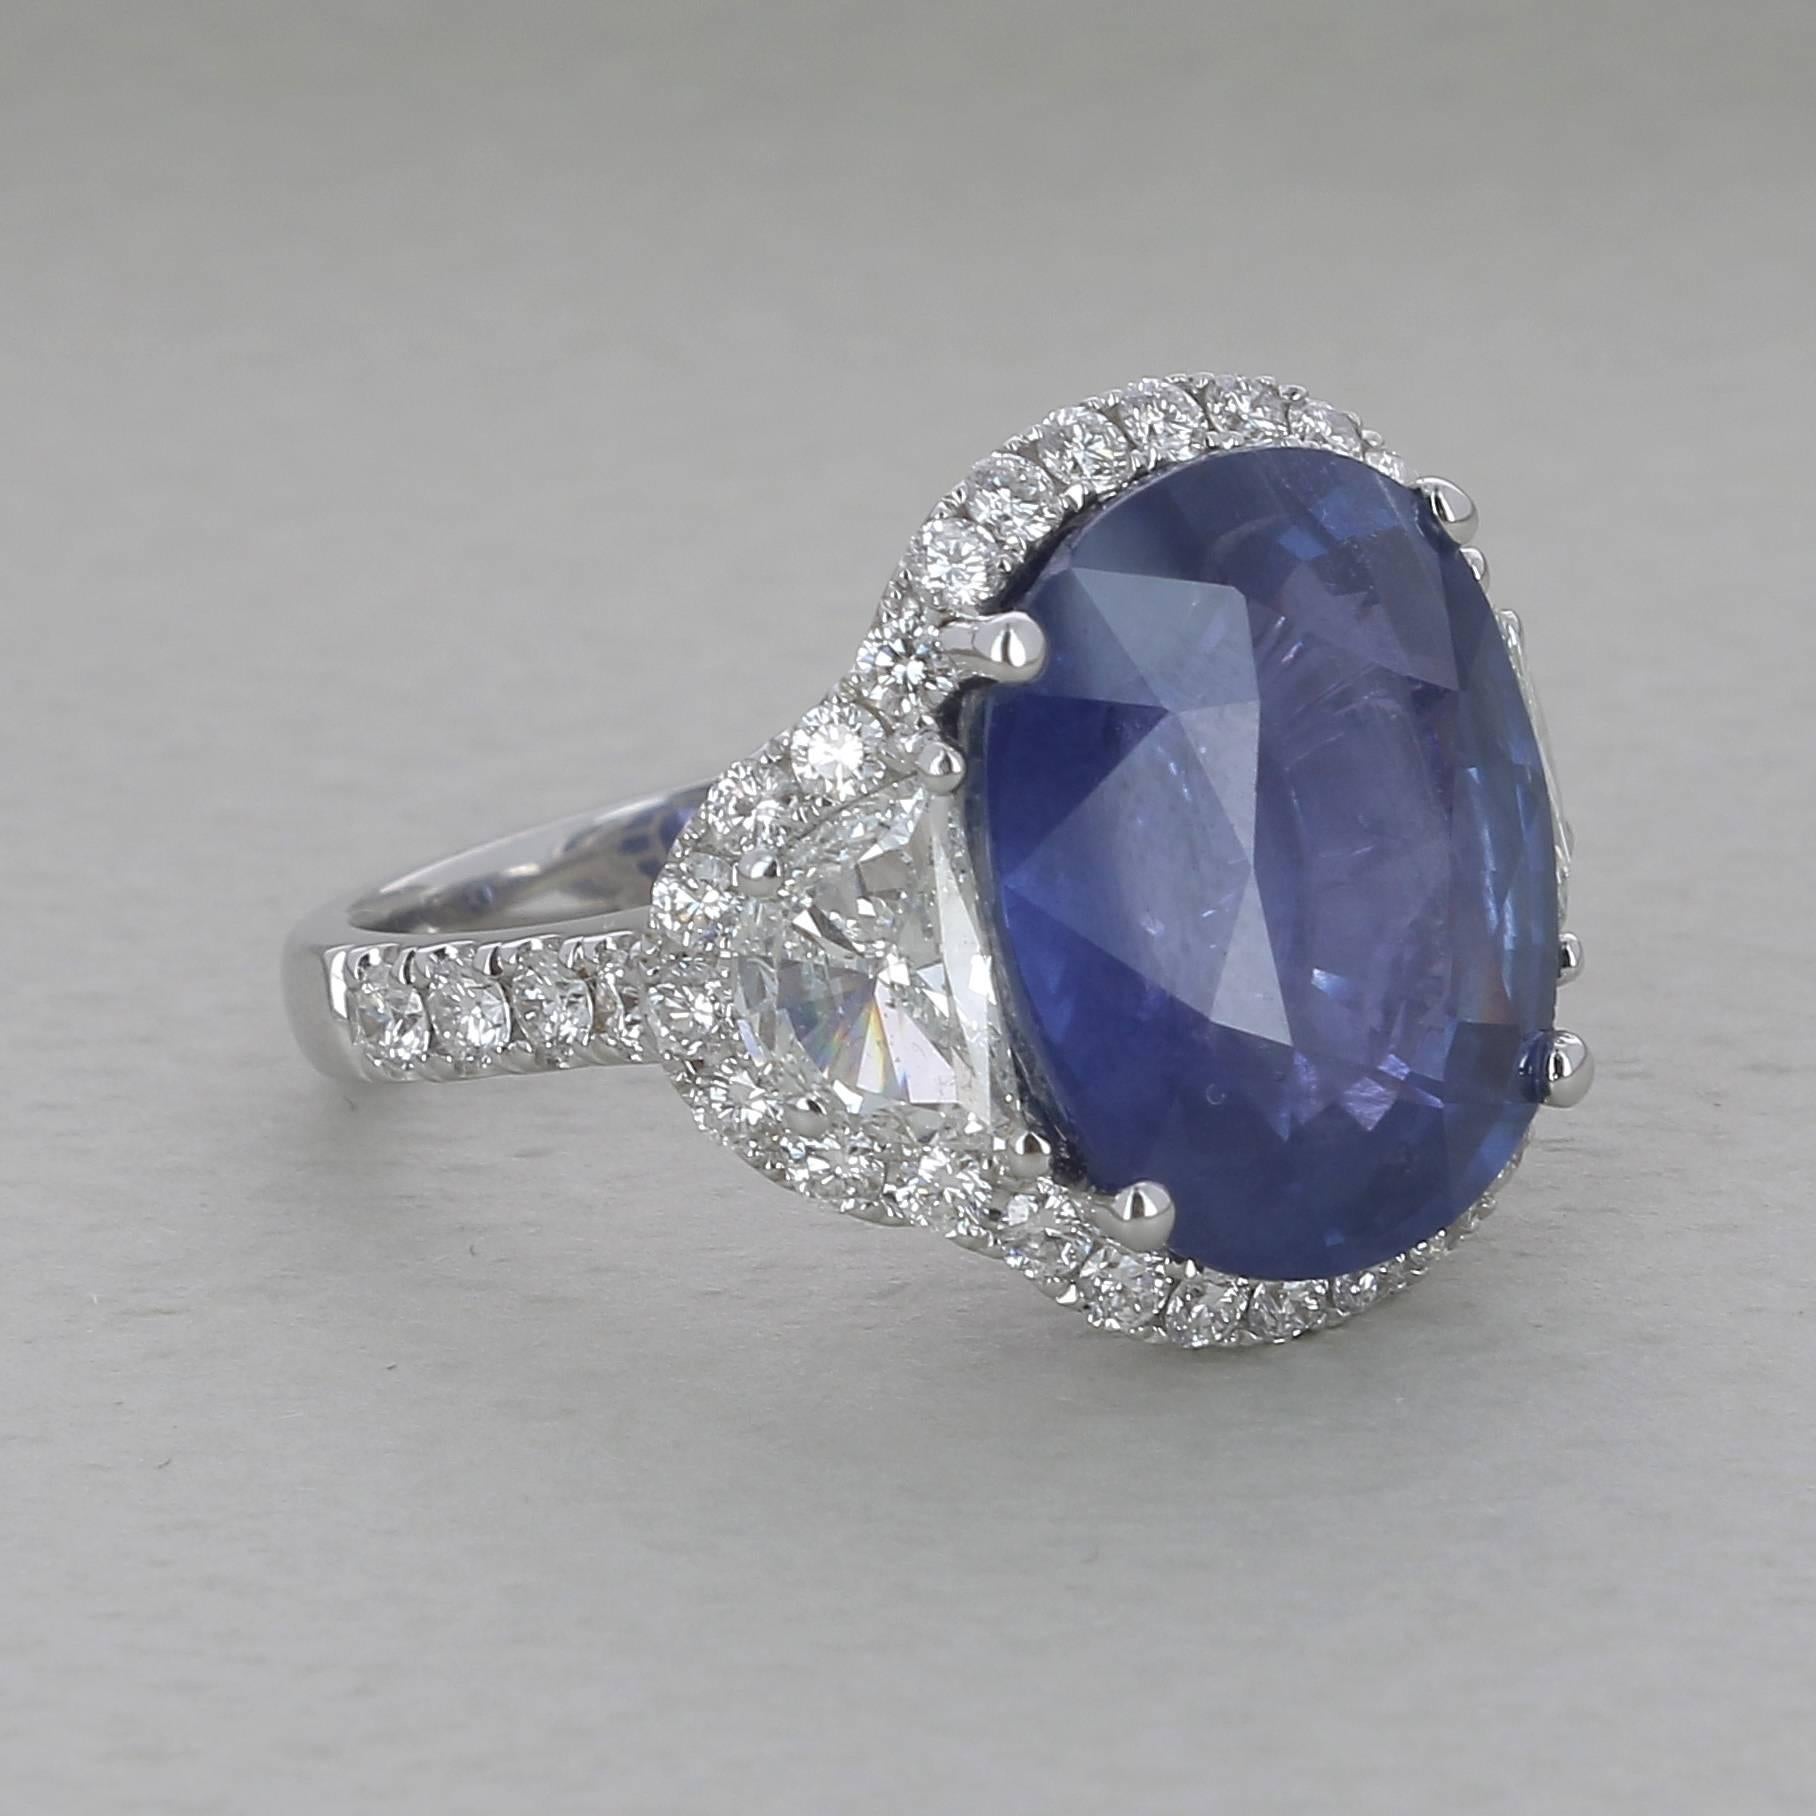 A natural unheated oval shaped blue sapphire weighing 15,96 carats,flanted by 2 half moon diamonds weighing 1,44 carats
All beautifully housed in a shaped halo of sparkling white diamonds 
This ring comes with his GRS Certificate stating there is no